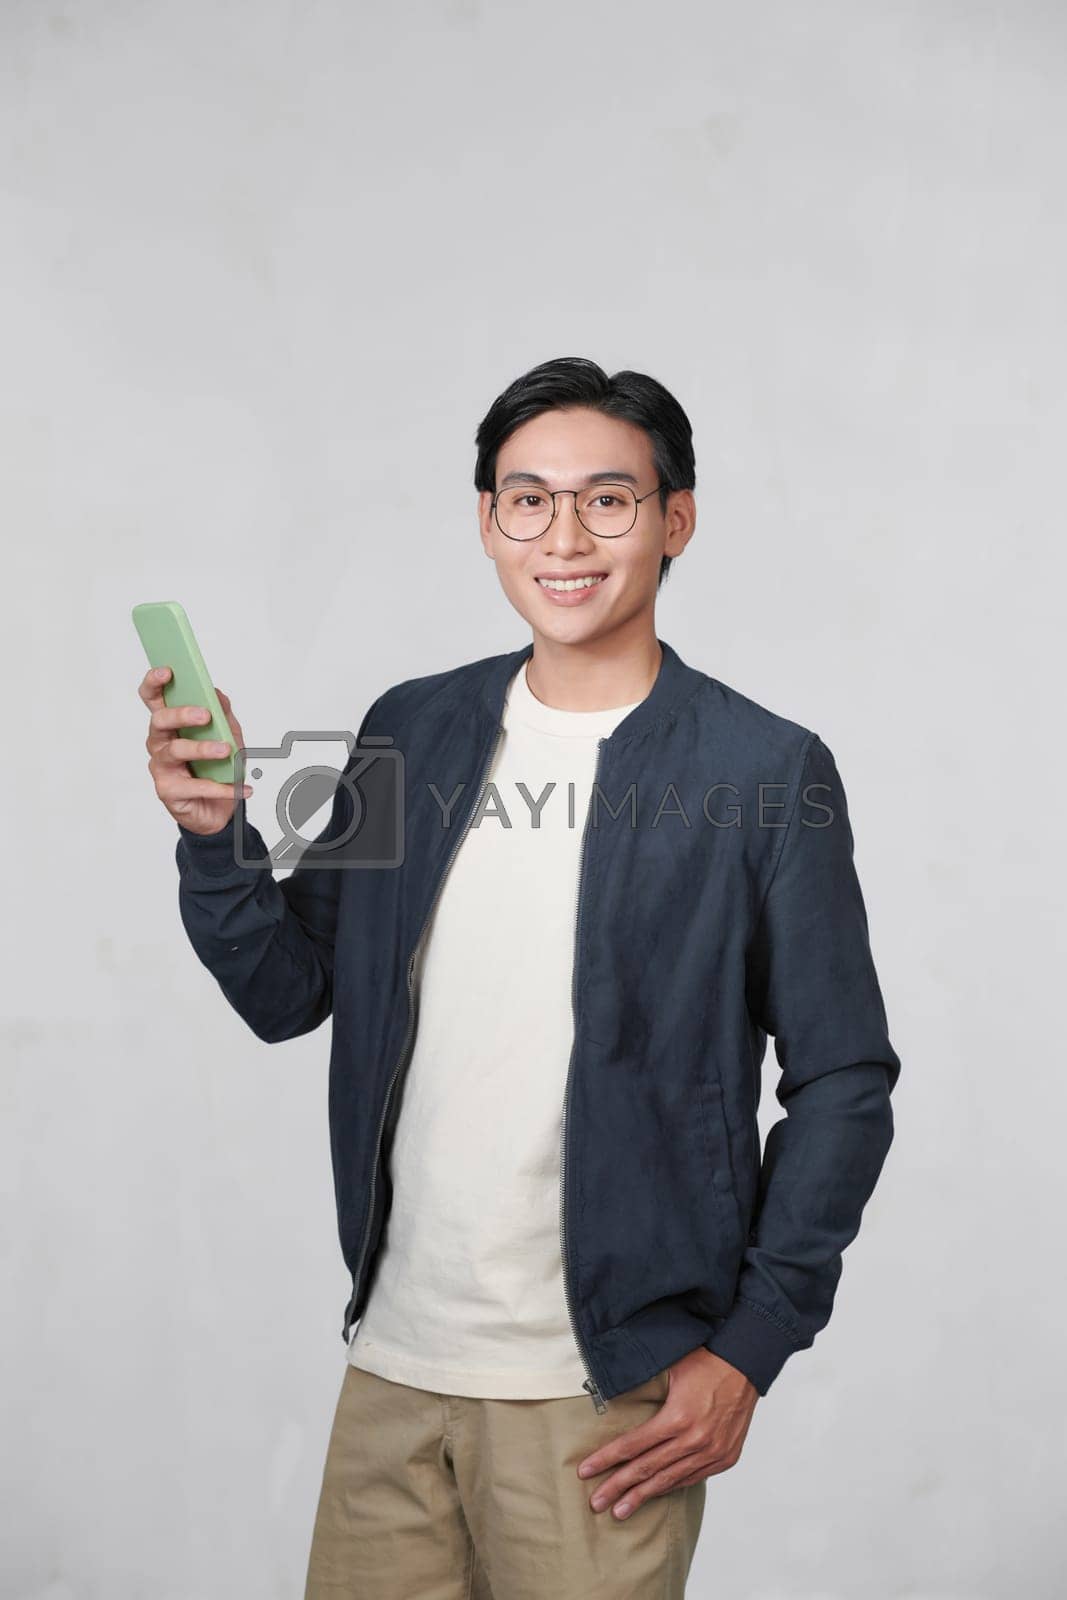 Royalty free image of Portrait of cheerful man using cellphone and smiling, reading good news message, enjoying mobile application by makidotvn